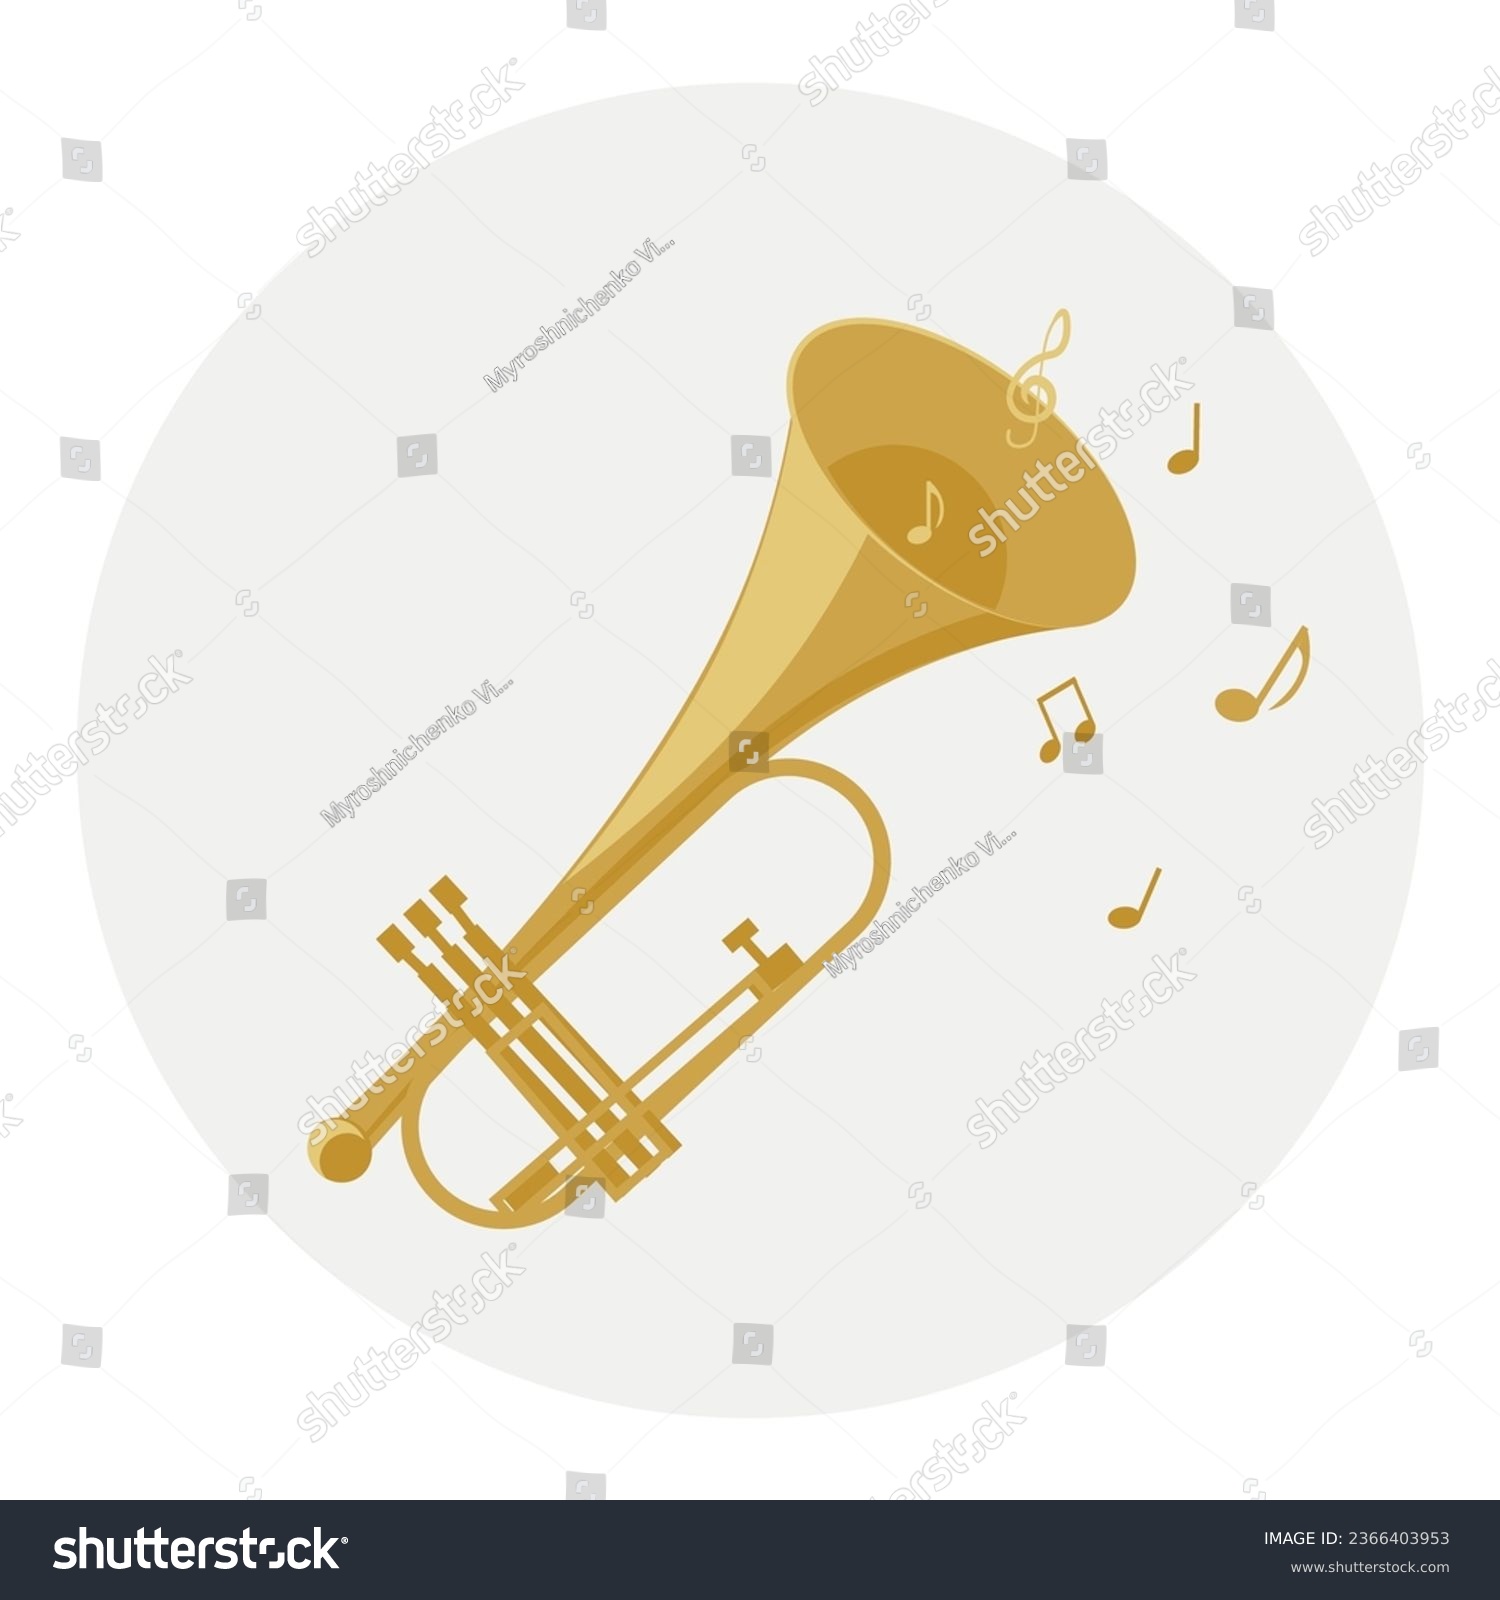 SVG of Vector trumpet icon. Flat illustration. Suitable for animation, using in web, apps, books, education projects. No transparency, solid colors only. Svg, lottie without bags. svg